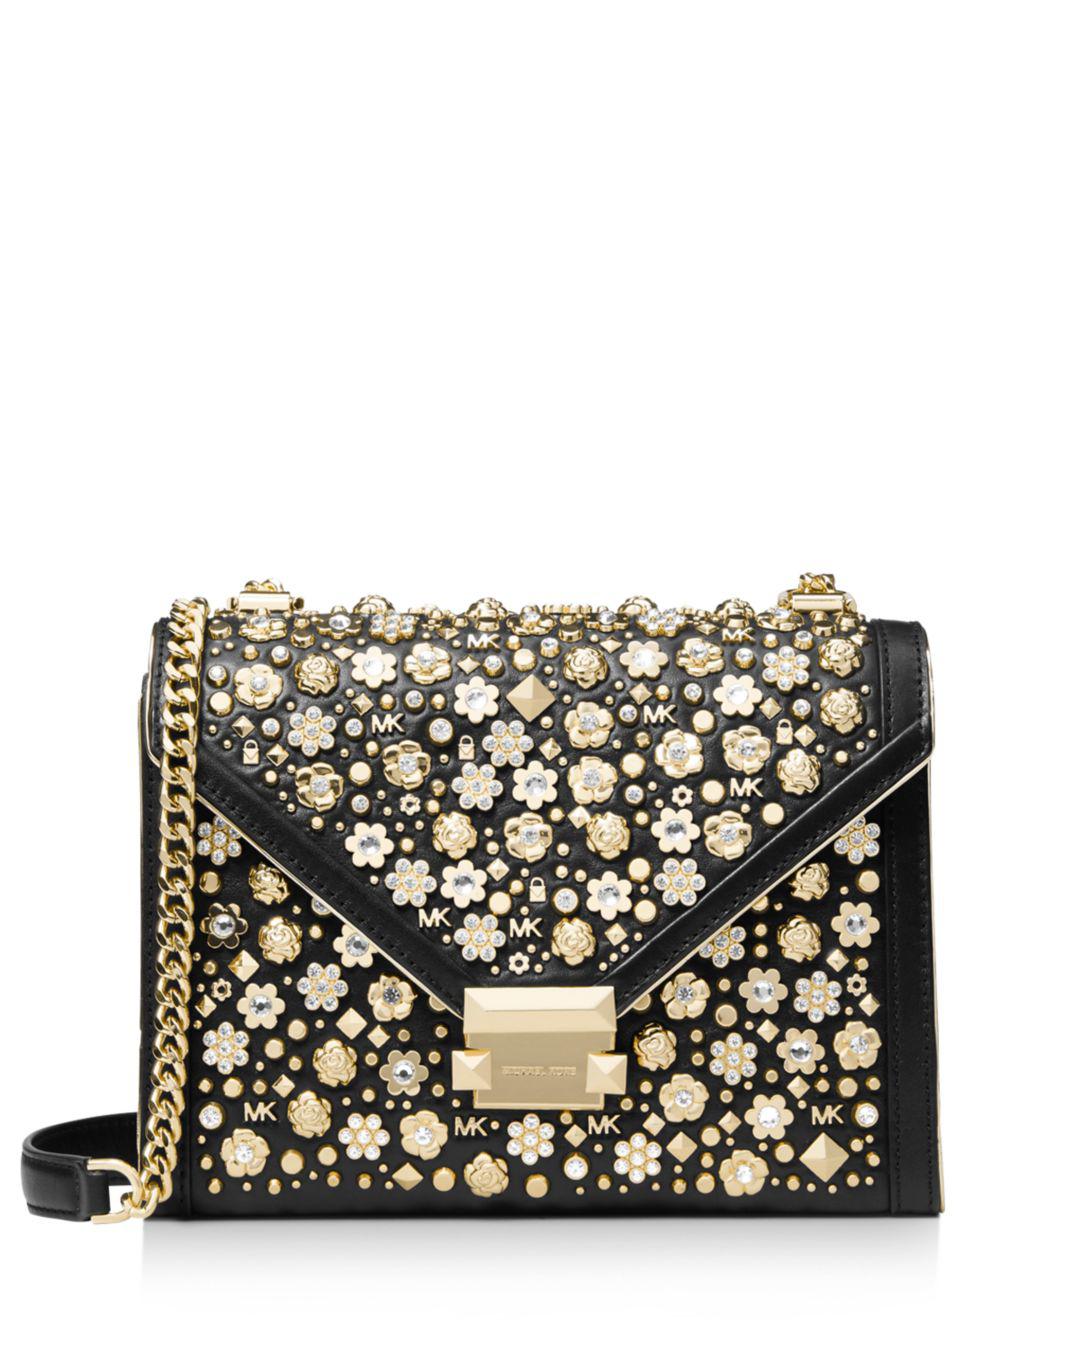 MICHAEL Michael Whitney Crystal Studded Convertible Shoulder in Black/Gold (Black) - Lyst